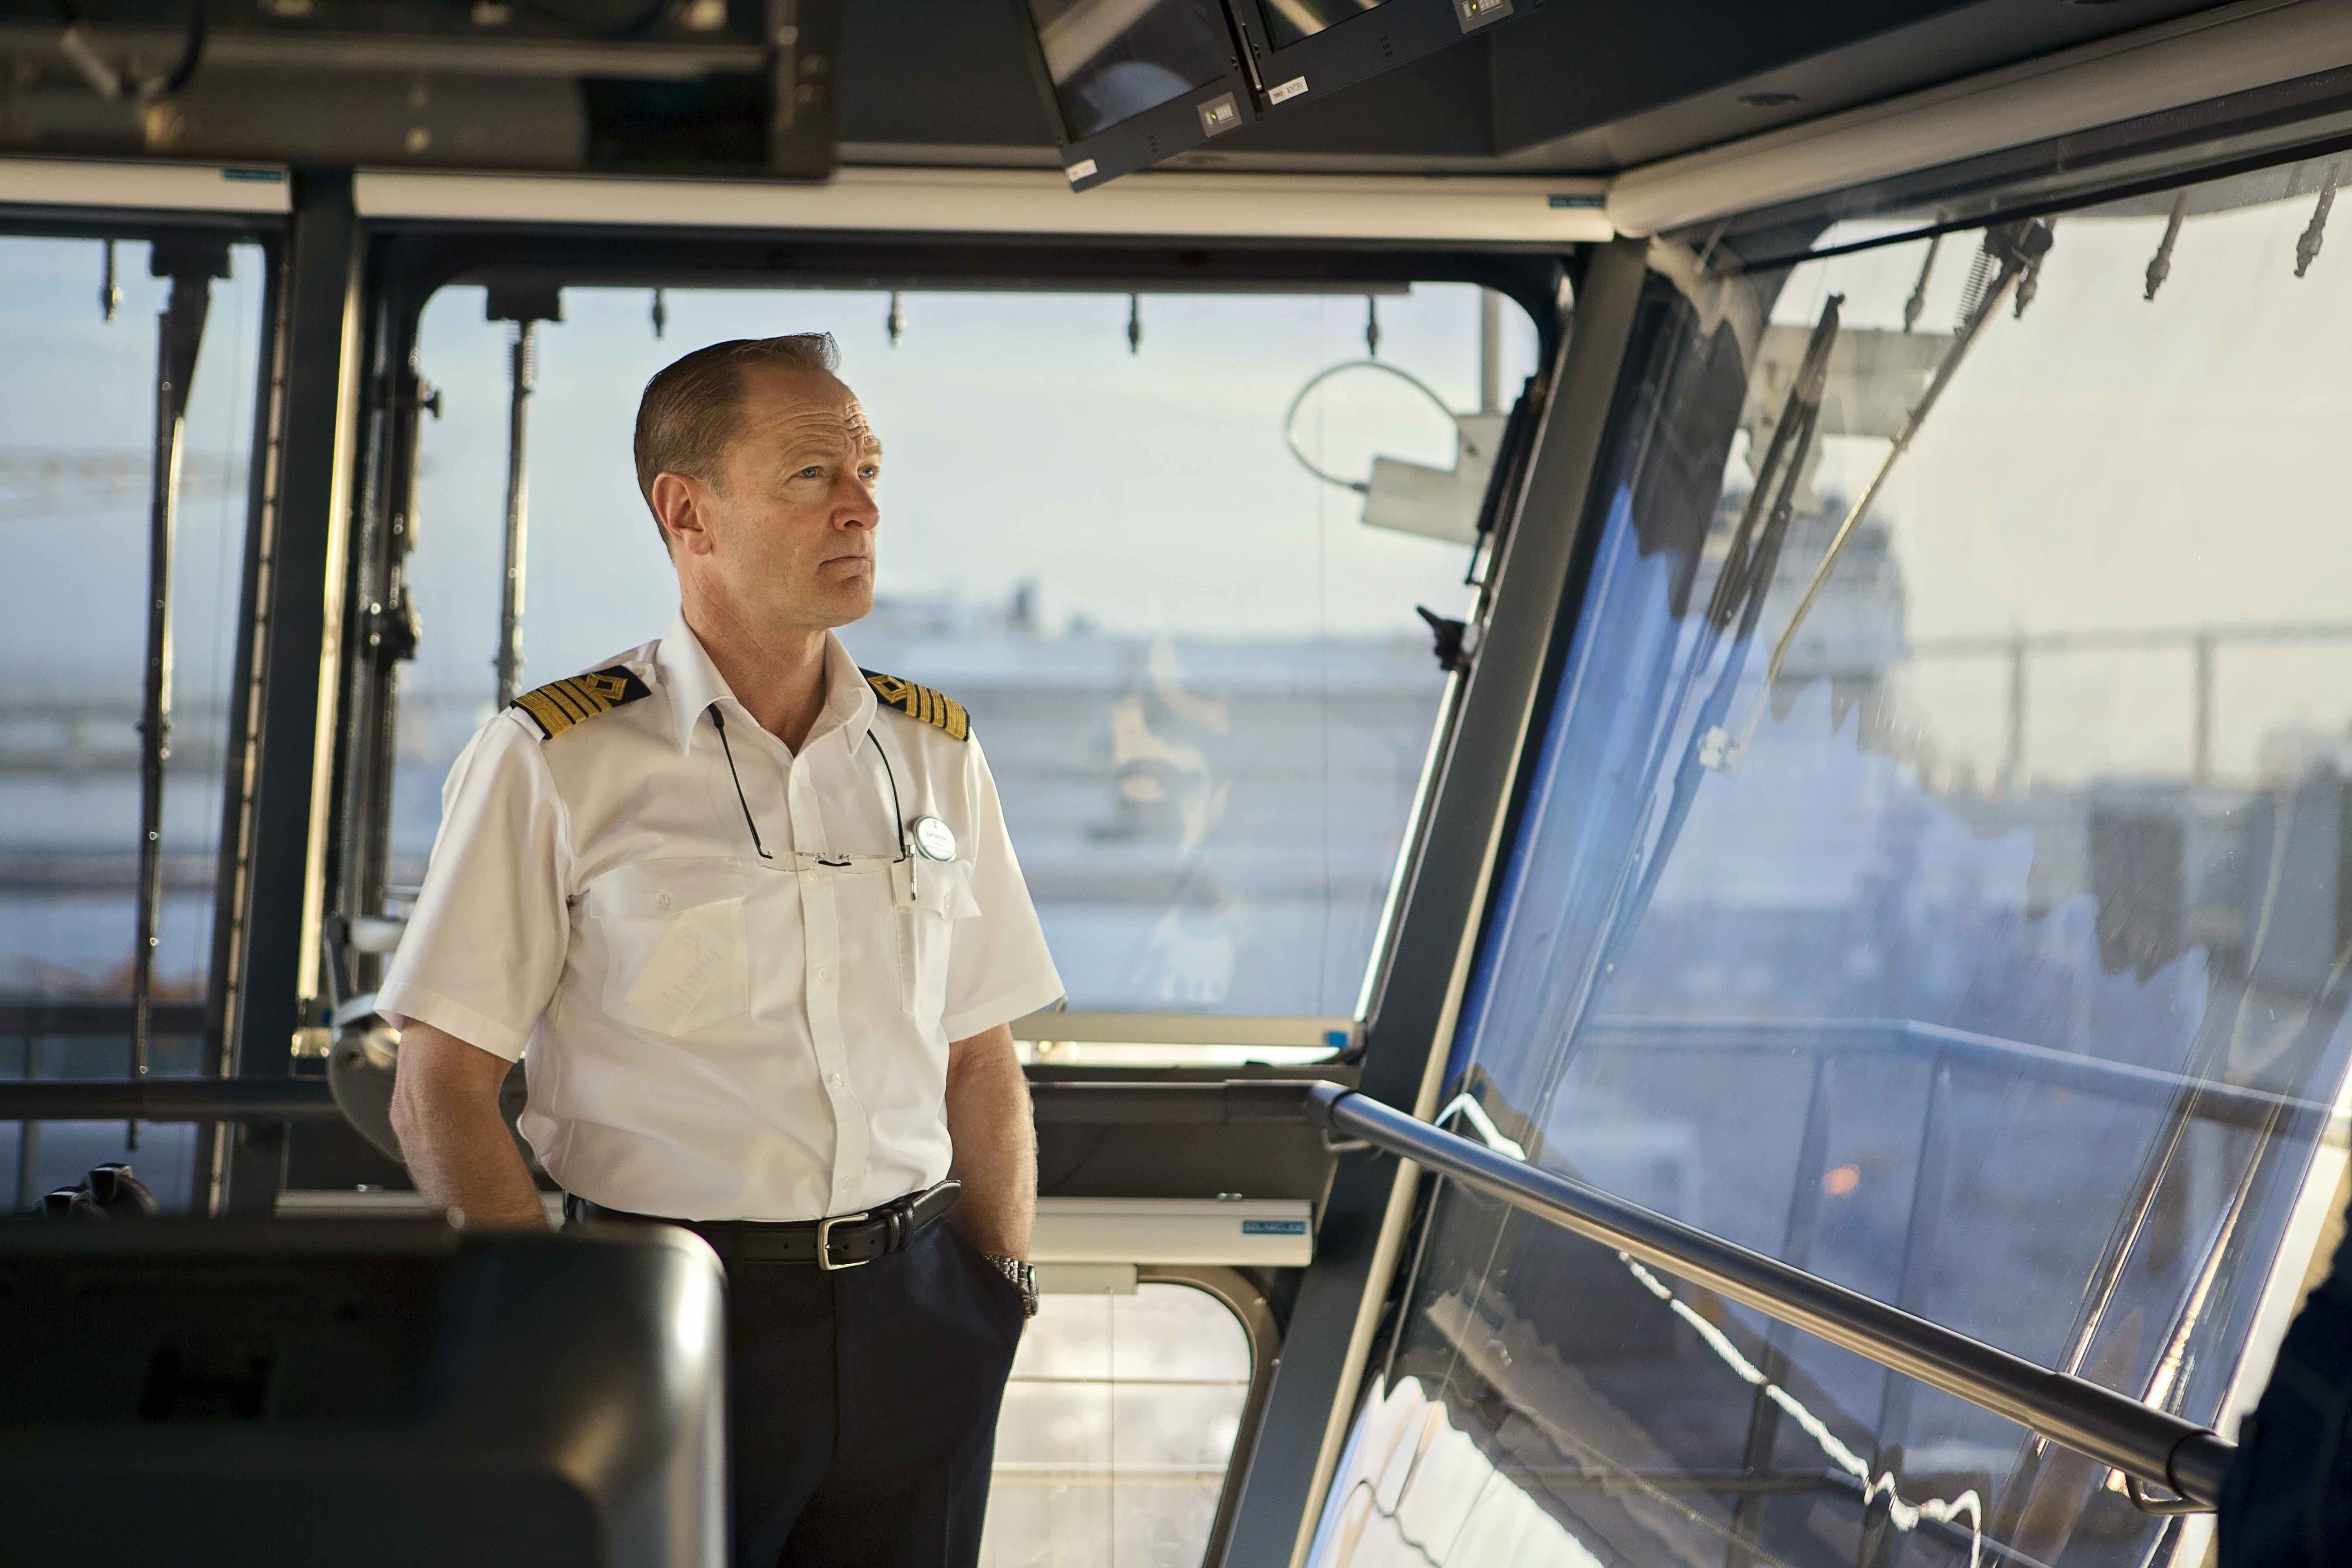 Meet the Captain of the Largest Ship in the World